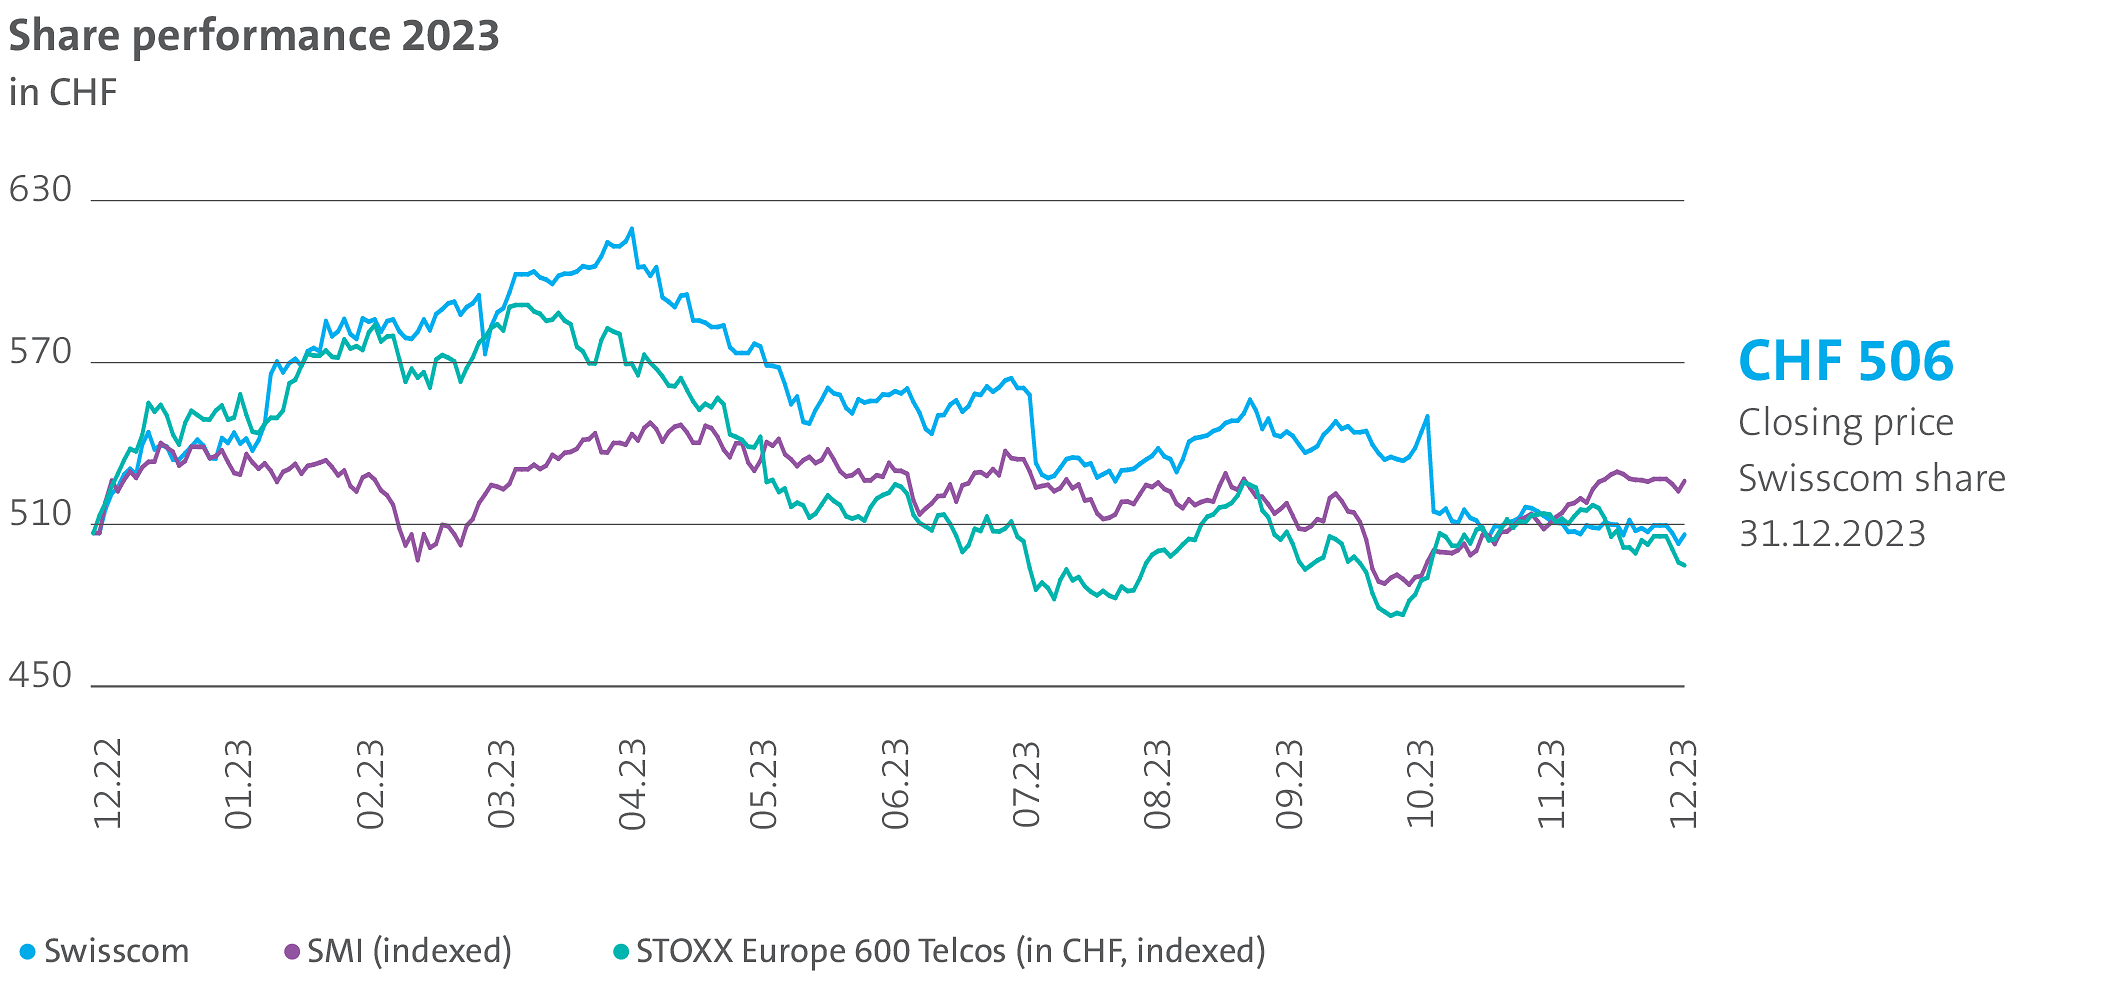 The graphic illustrates the share per­for­mance of Swisscom, the SMI and the Stoxx in 2023. The closing price of the Swisscom share on 31 December 2023 was CHF 506.